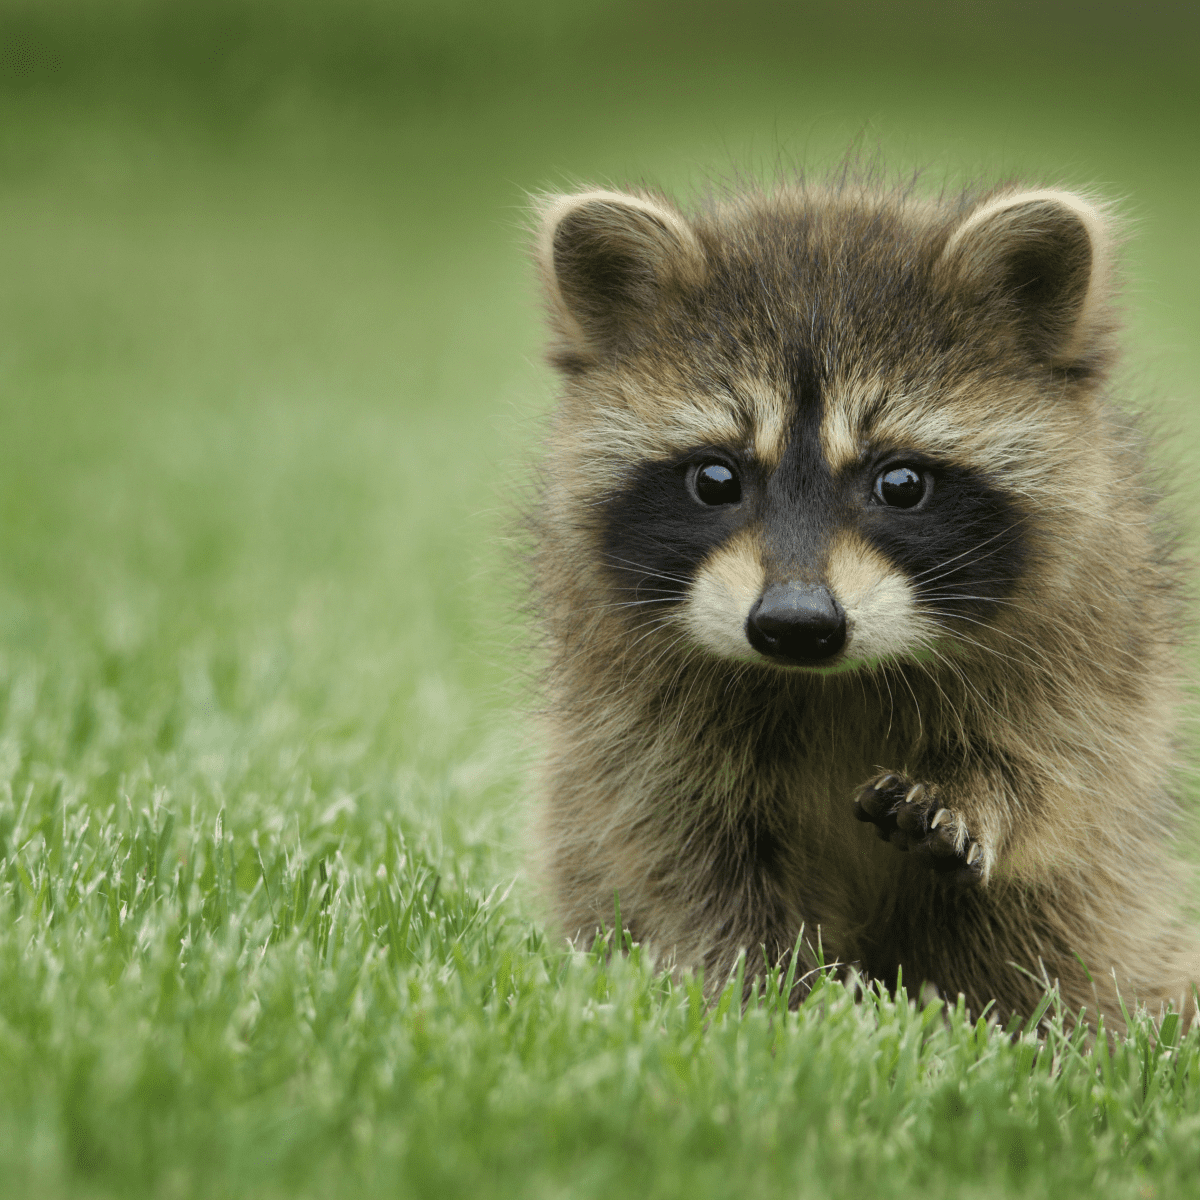 Can I kill rats, raccoons and other pests in Ottawa?